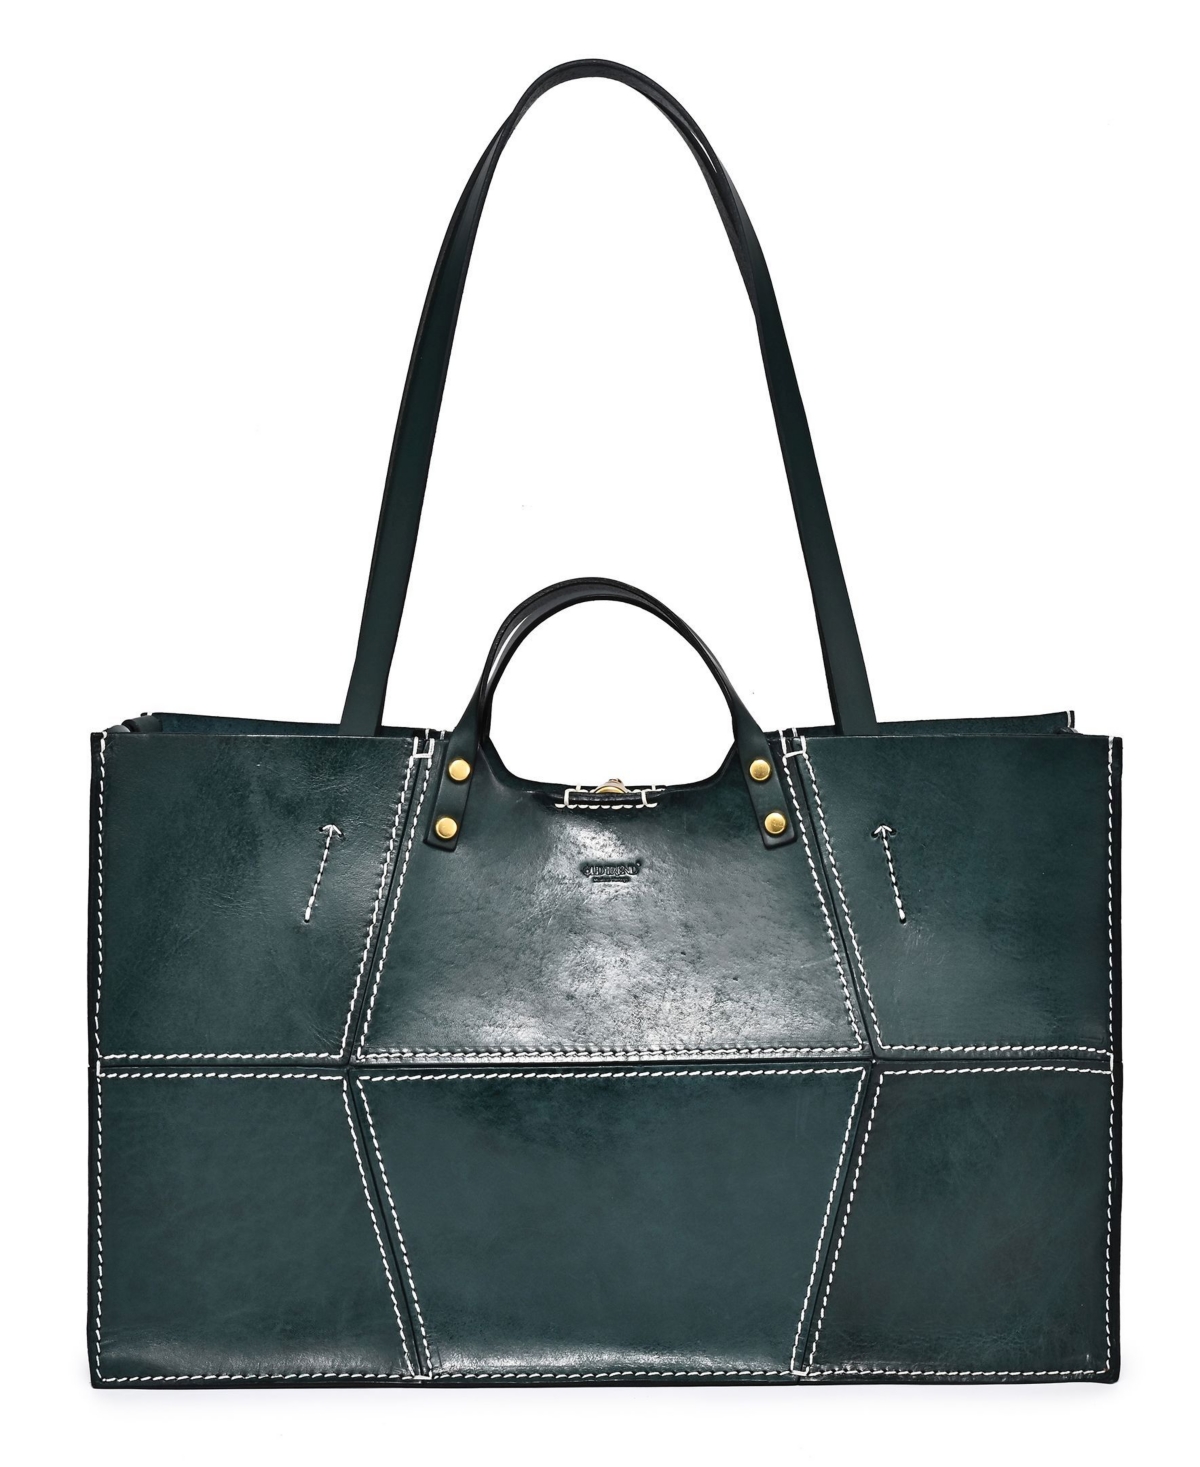 Women's Genuine Leather Rose All-day Tote Bag - Teal